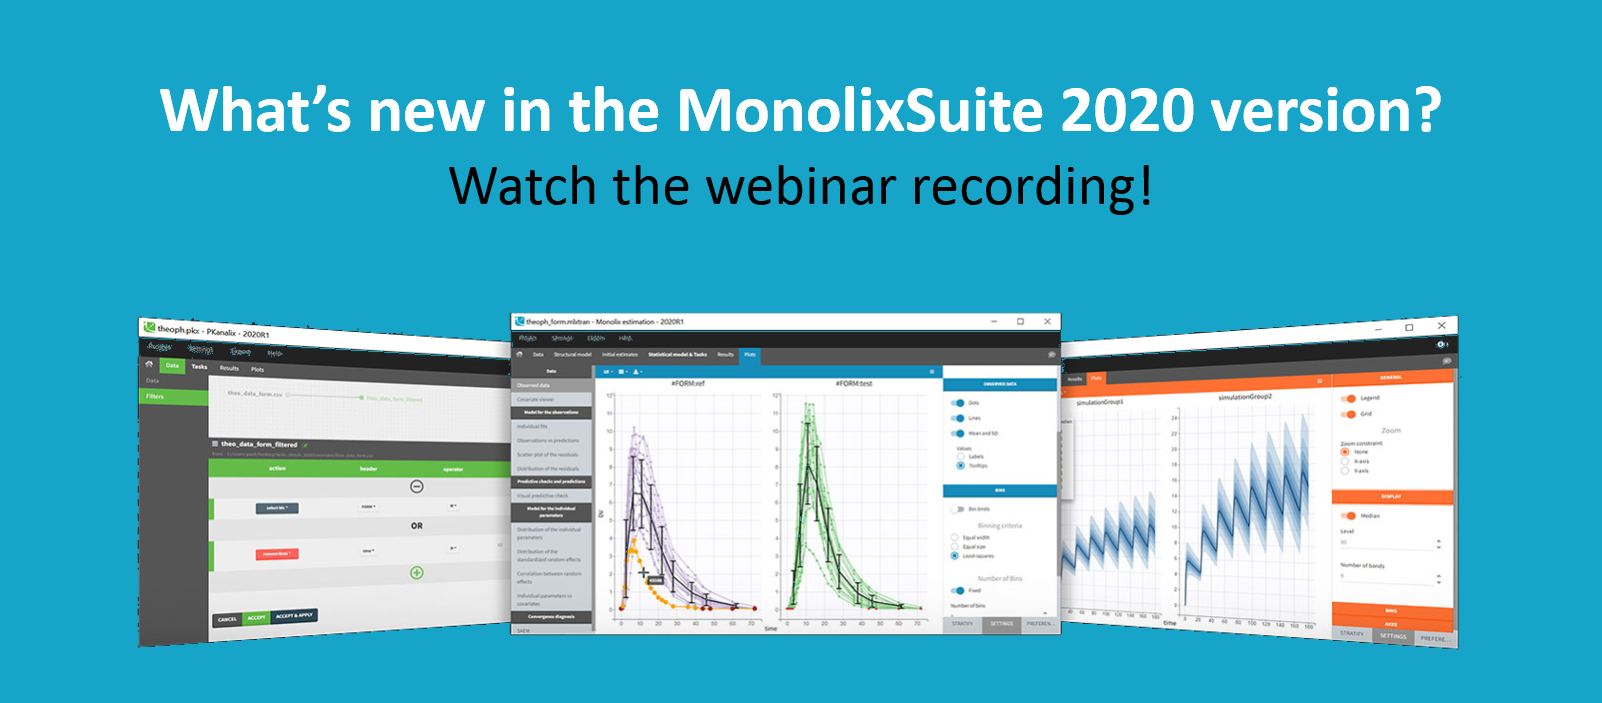 What’s new in the MonolixSuite 2020